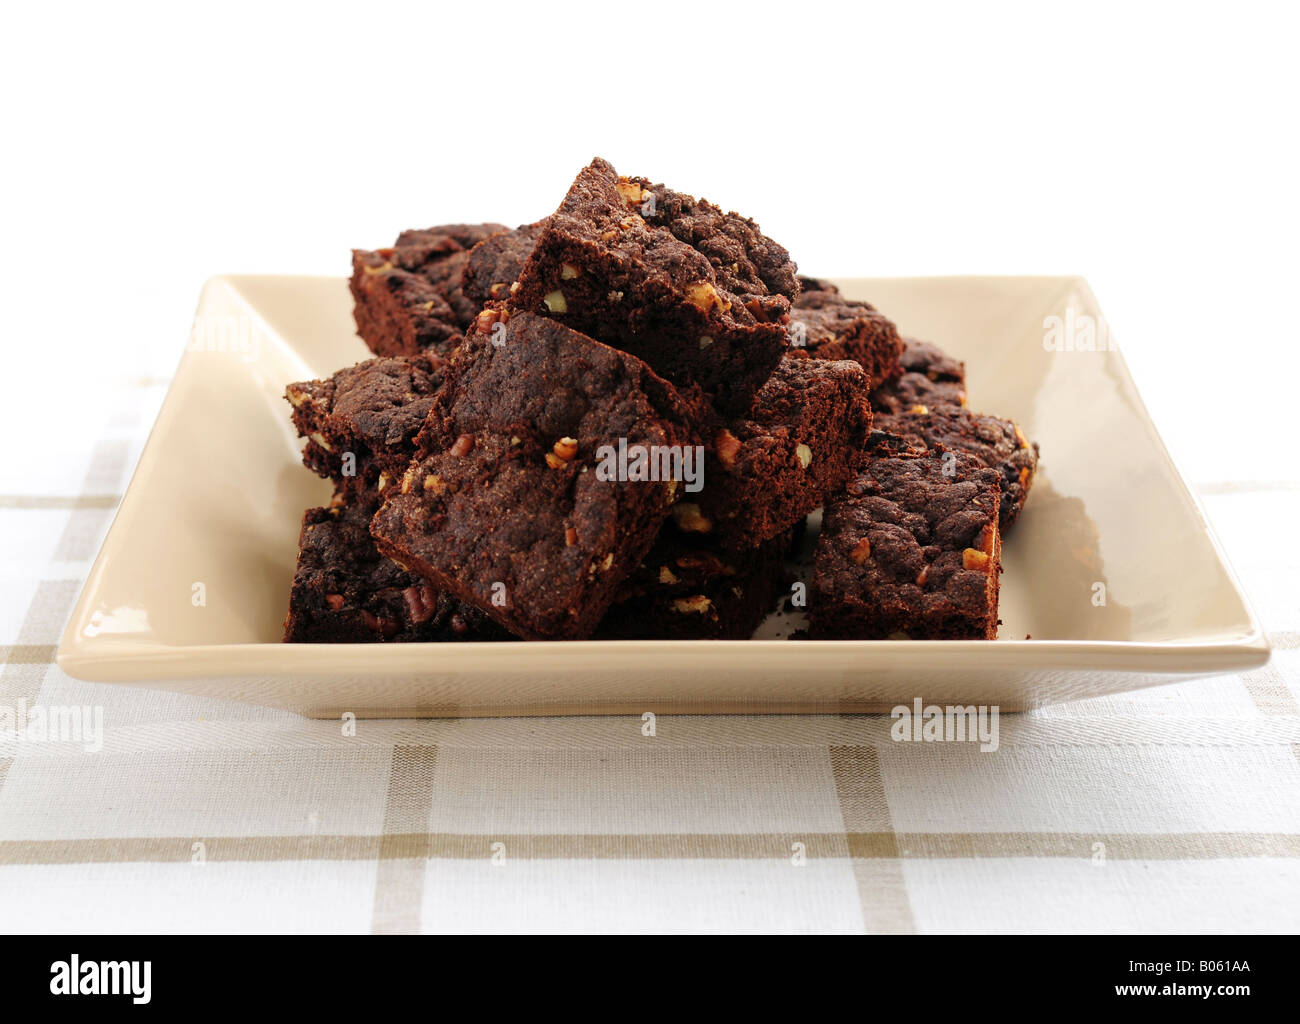 Homemade chocolate brownies served on a plate Stock Photo